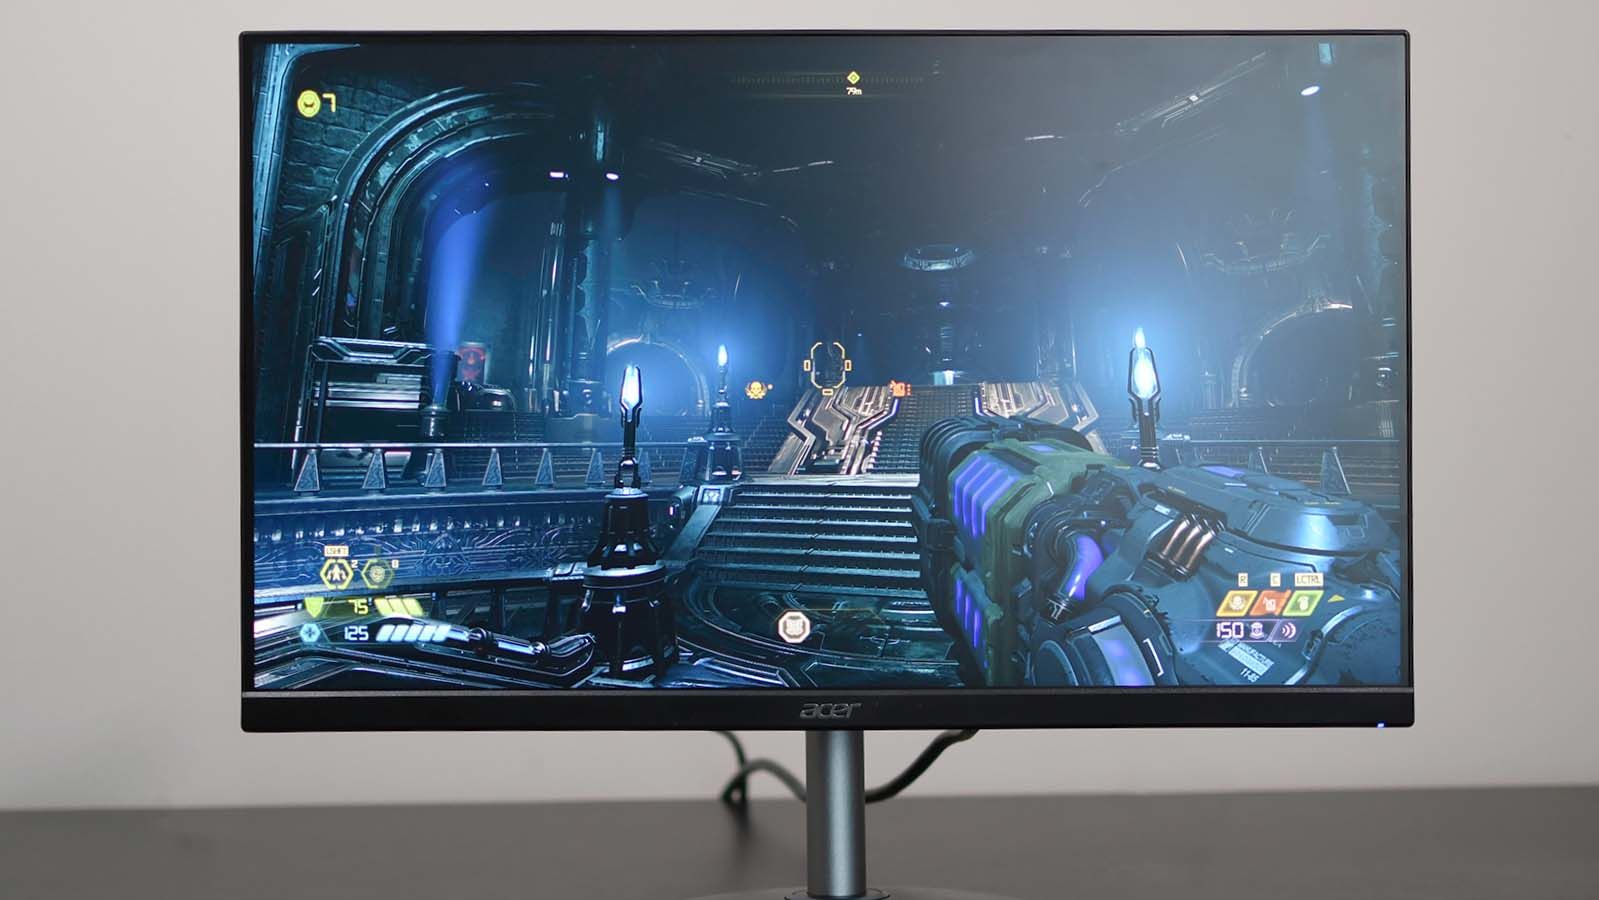 I review monitors for a living – 2K resolution or better is necessary for  work